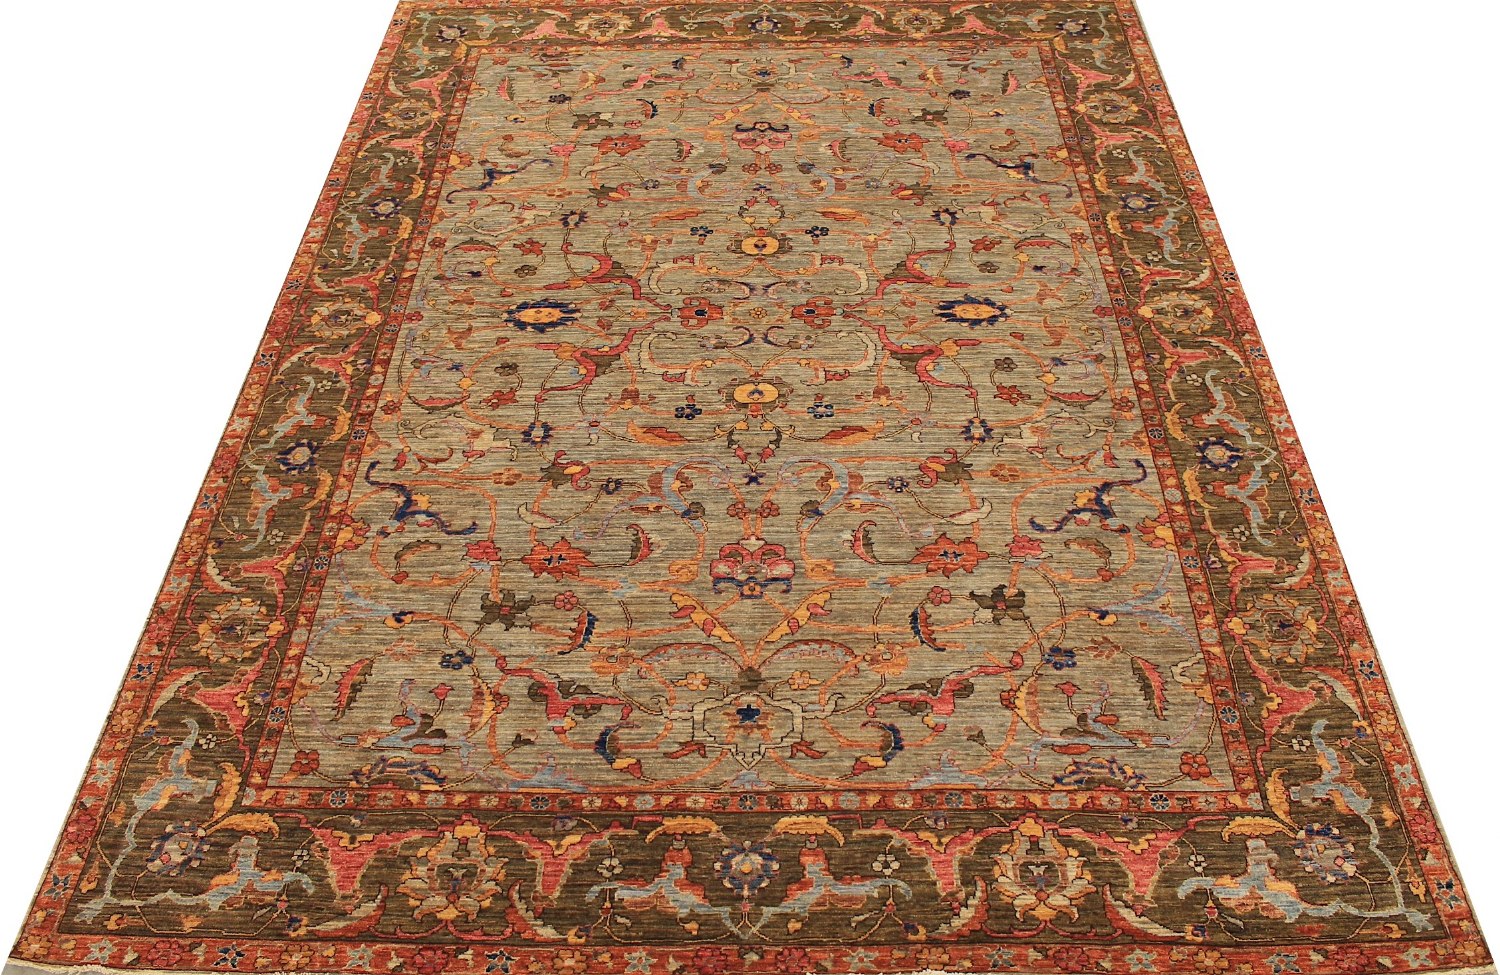 9x12 Aryana & Antique Revivals Hand Knotted Wool Area Rug - MR028846